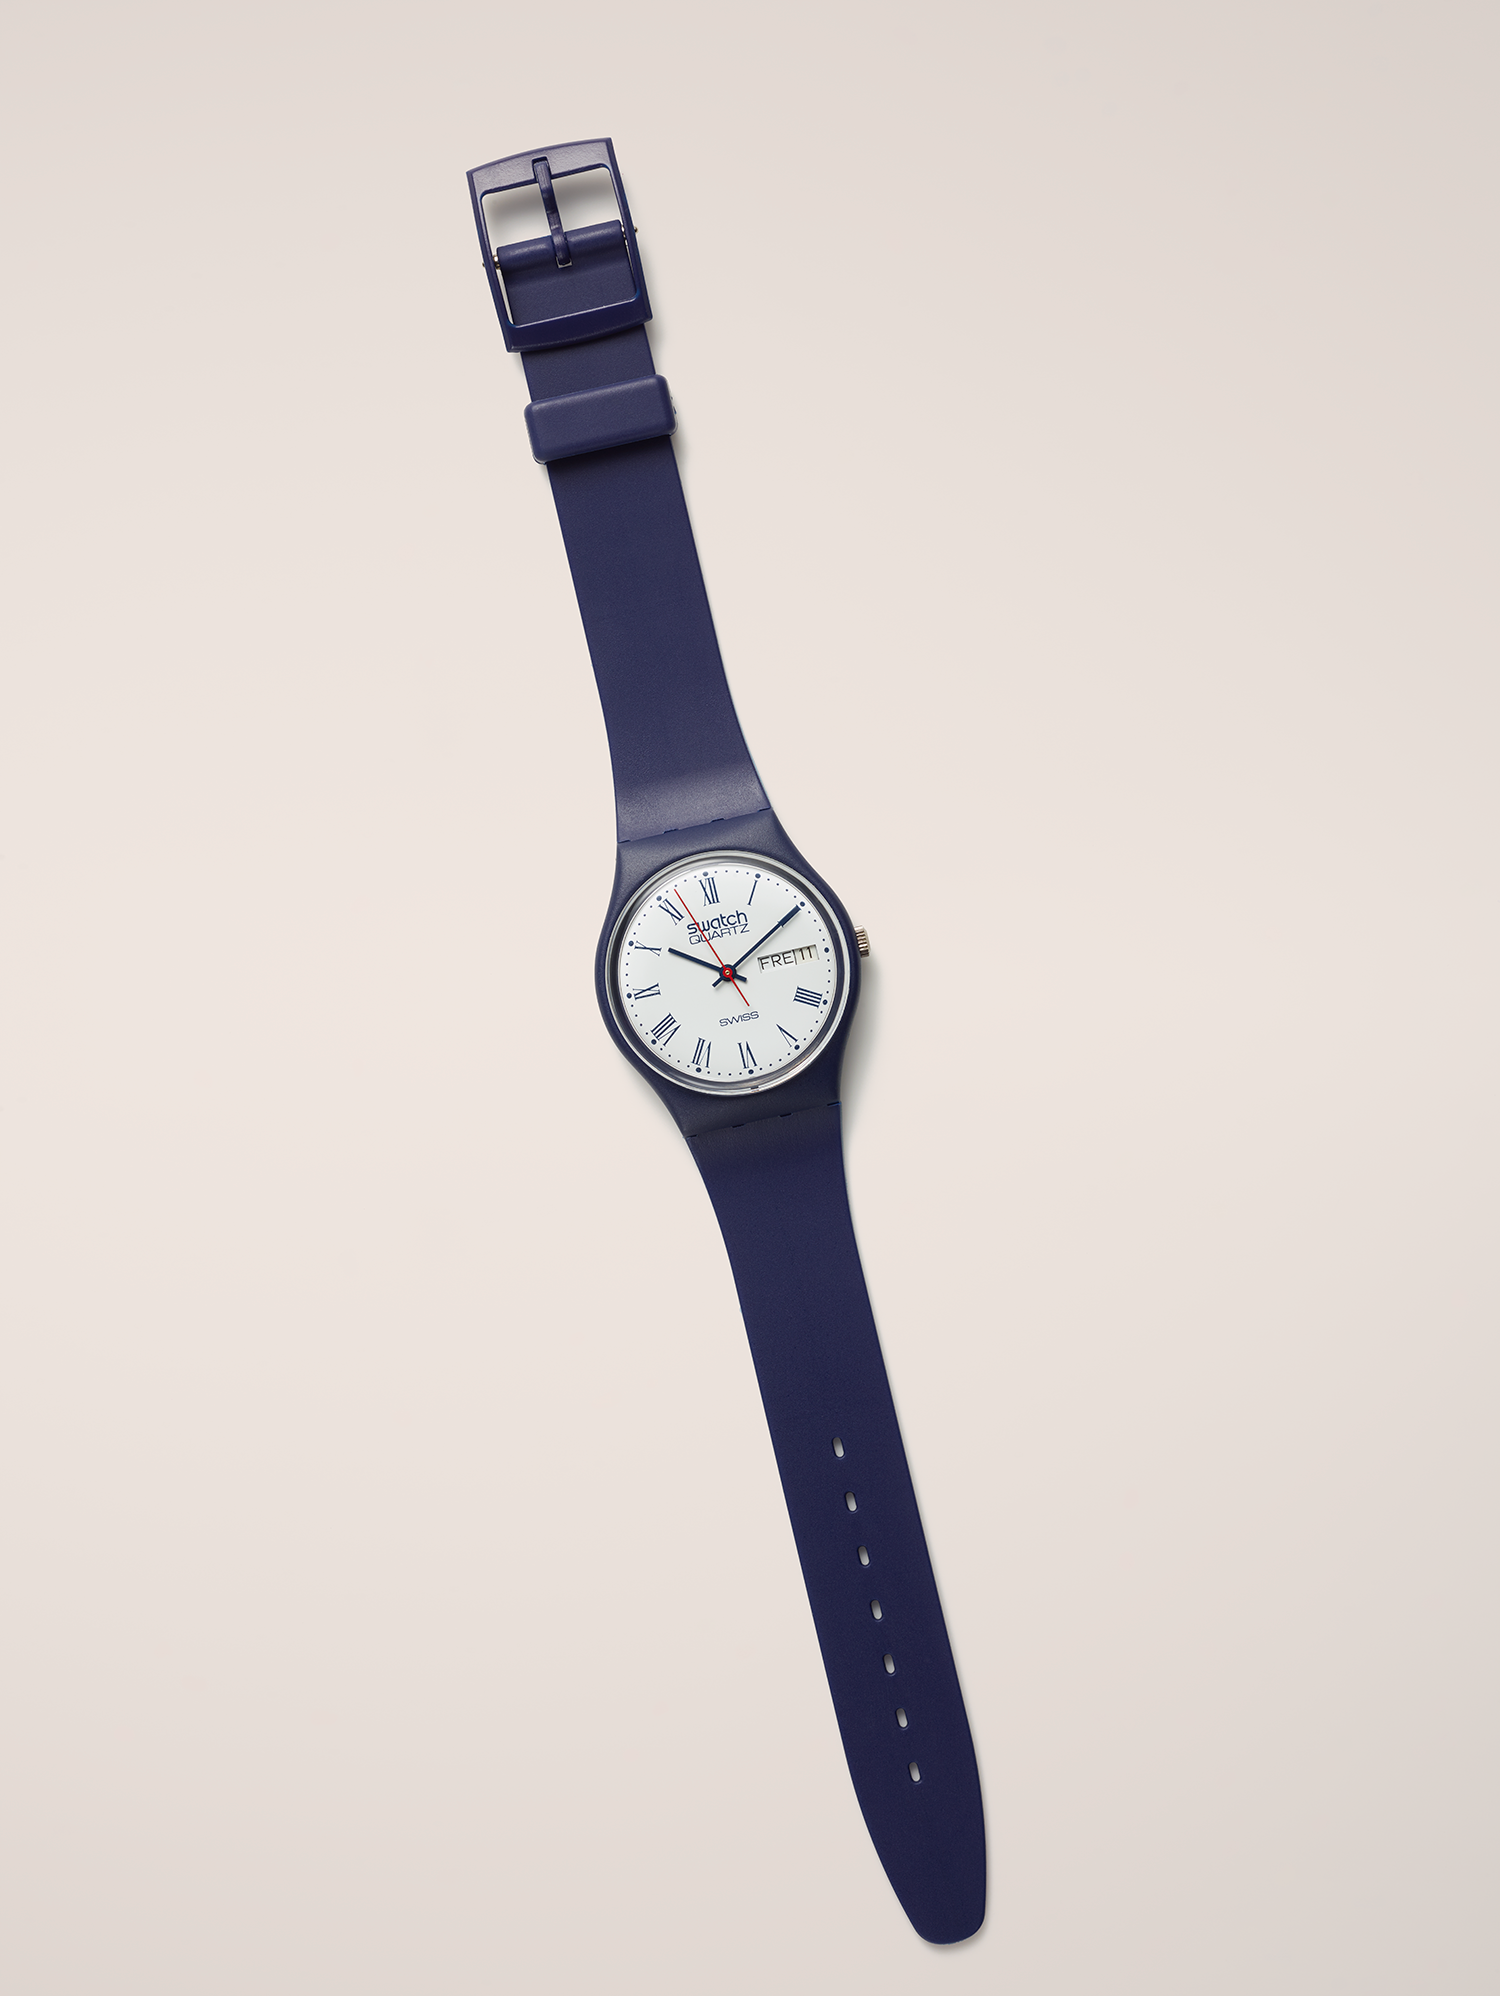 Swatch Analog Watch - For Women - Buy Swatch Analog Watch - For Women  YLG126G Online at Best Prices in India | Flipkart.com